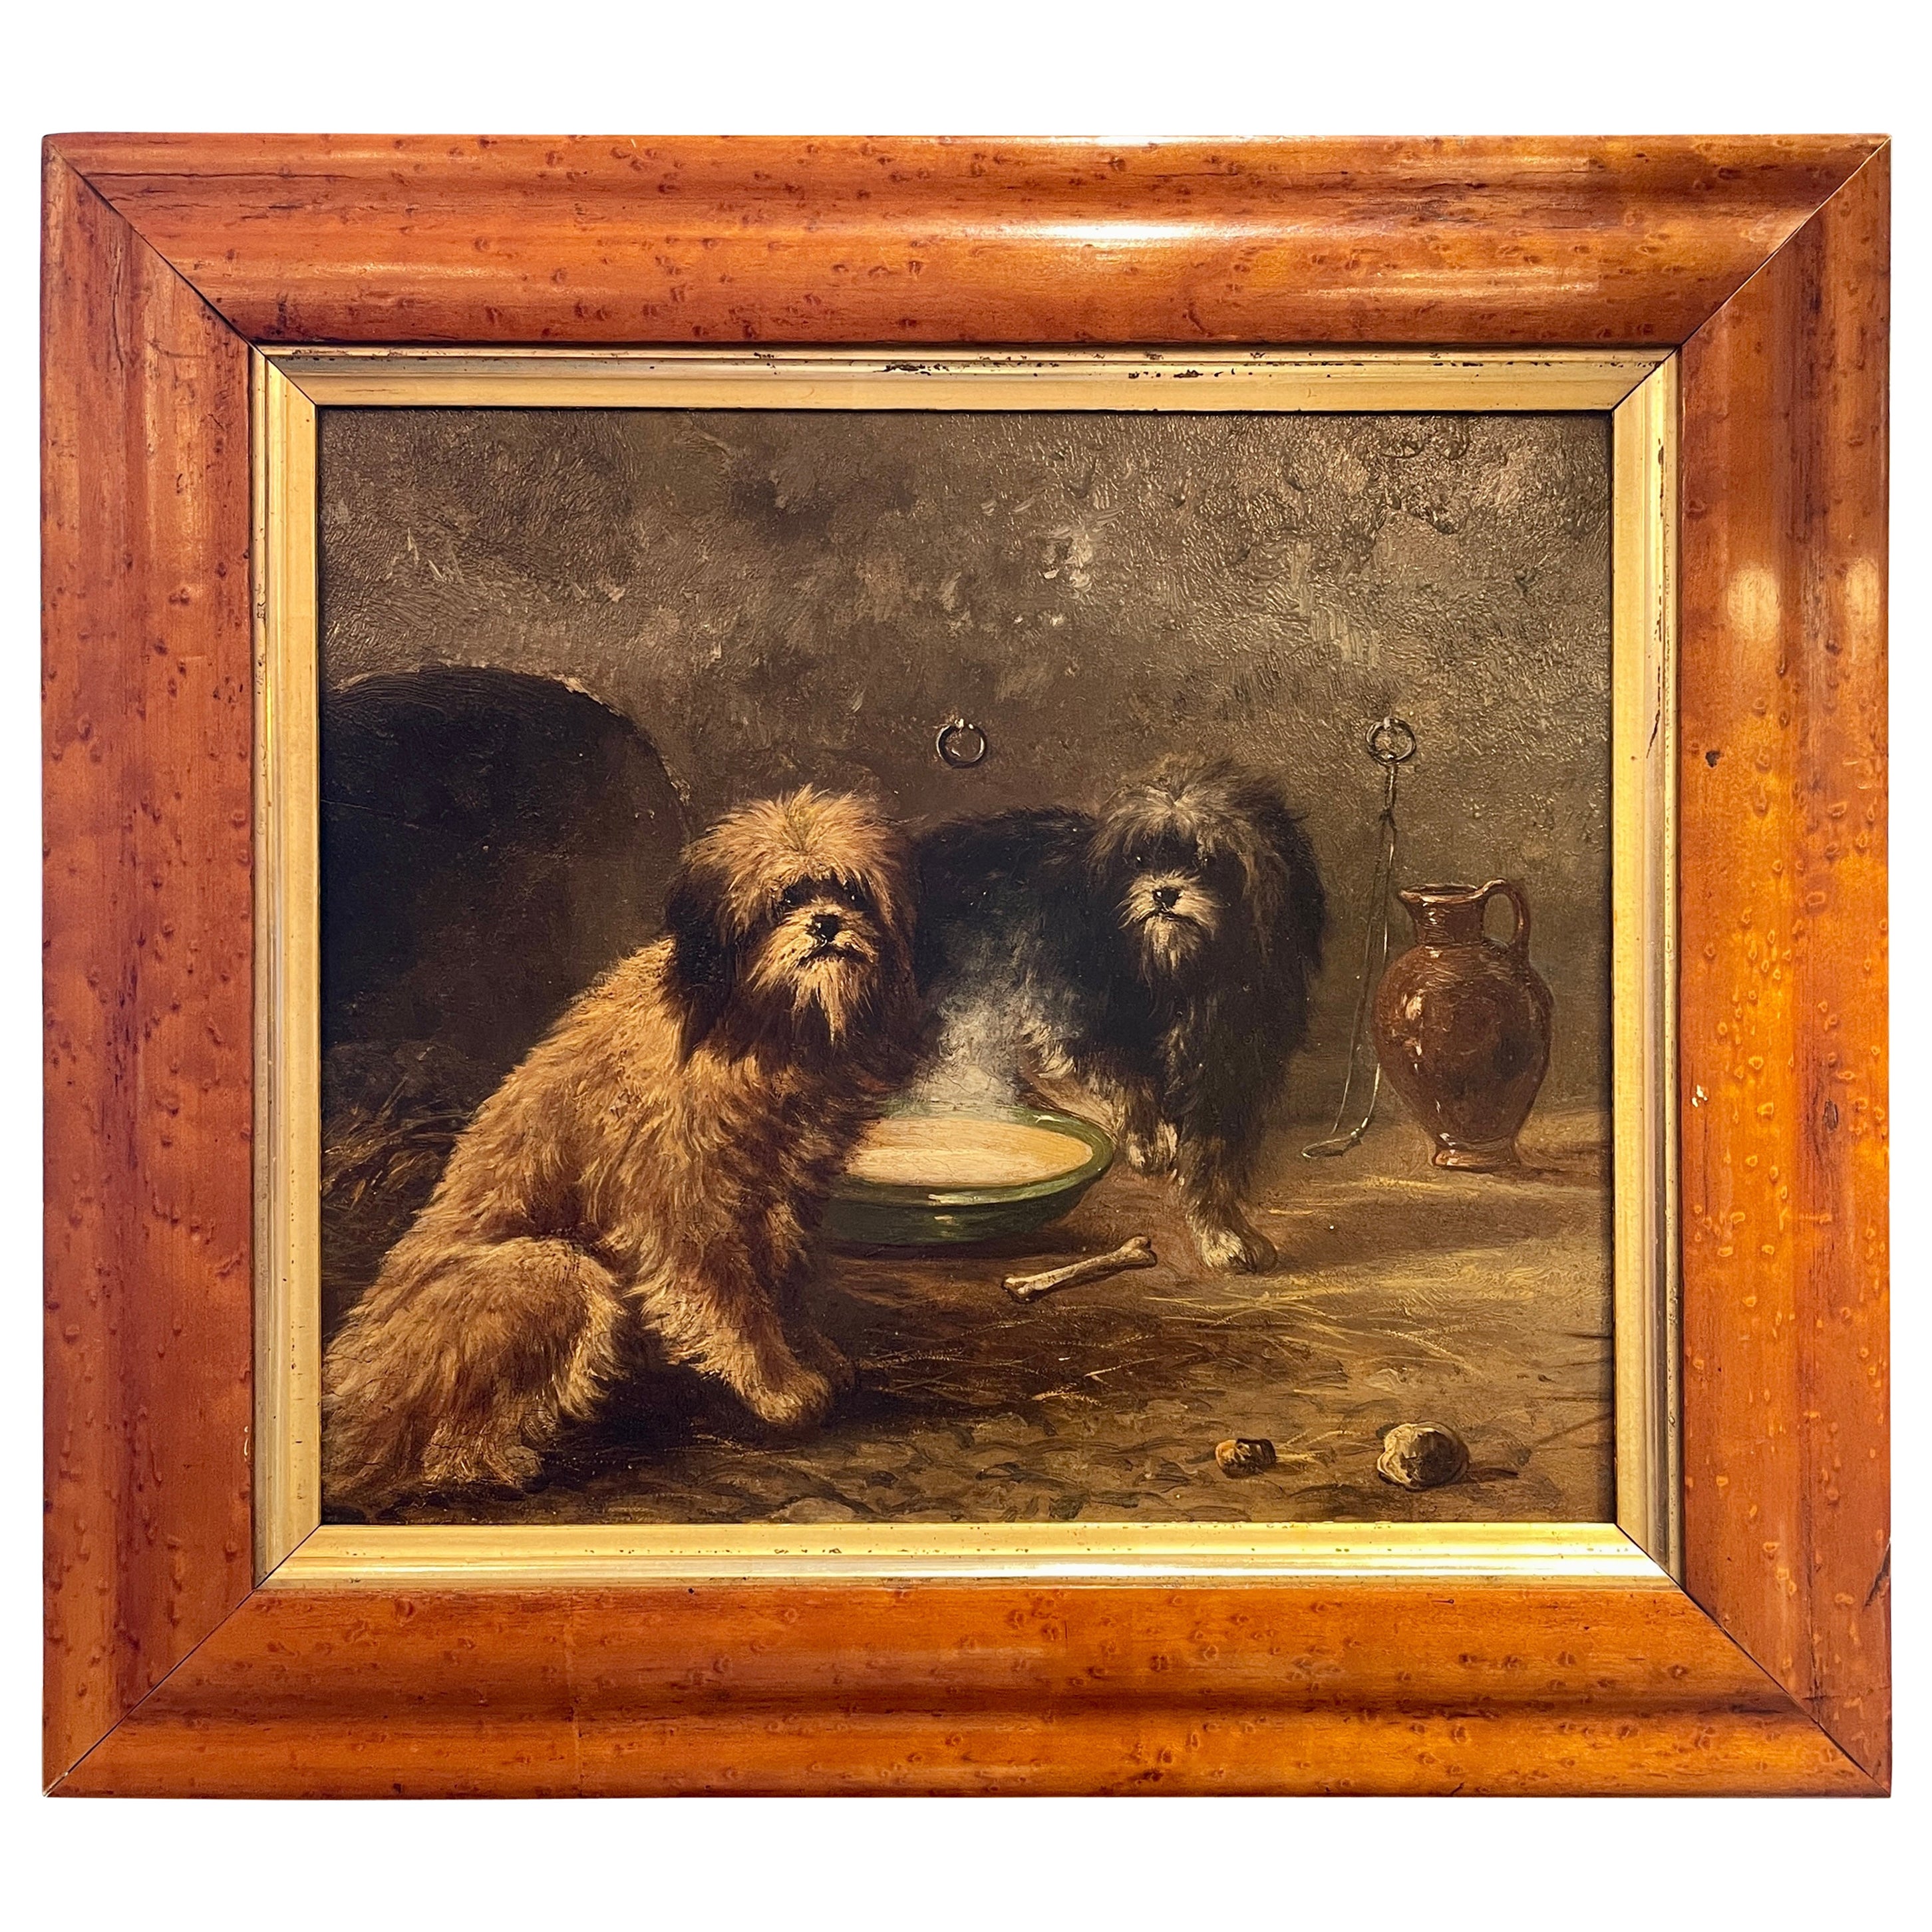 Antique English Framed Oil Painting on Wood Panel of Dogs, Circa 1920's